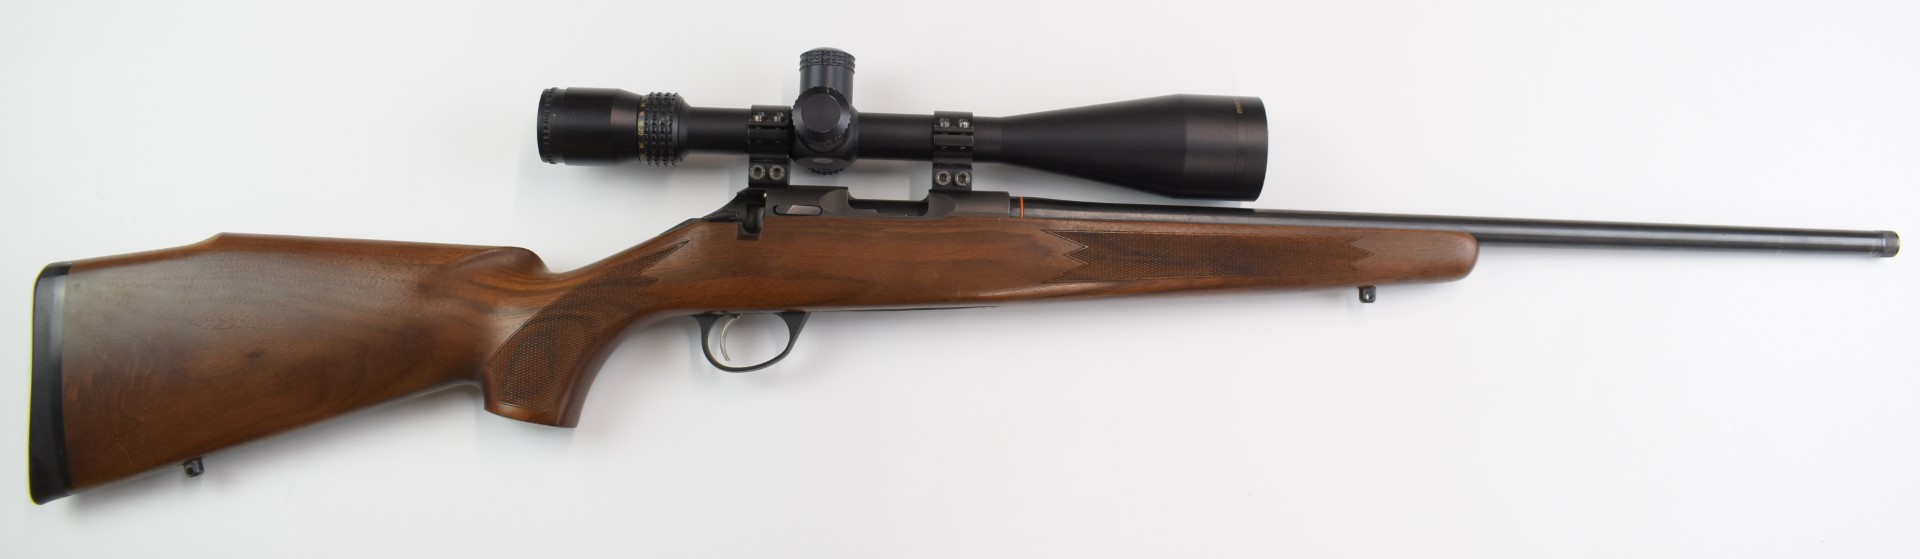 Sako P04R .17 bolt-action rifle with chequered semi-pistol grip and forend, raised cheek piece, - Image 22 of 26